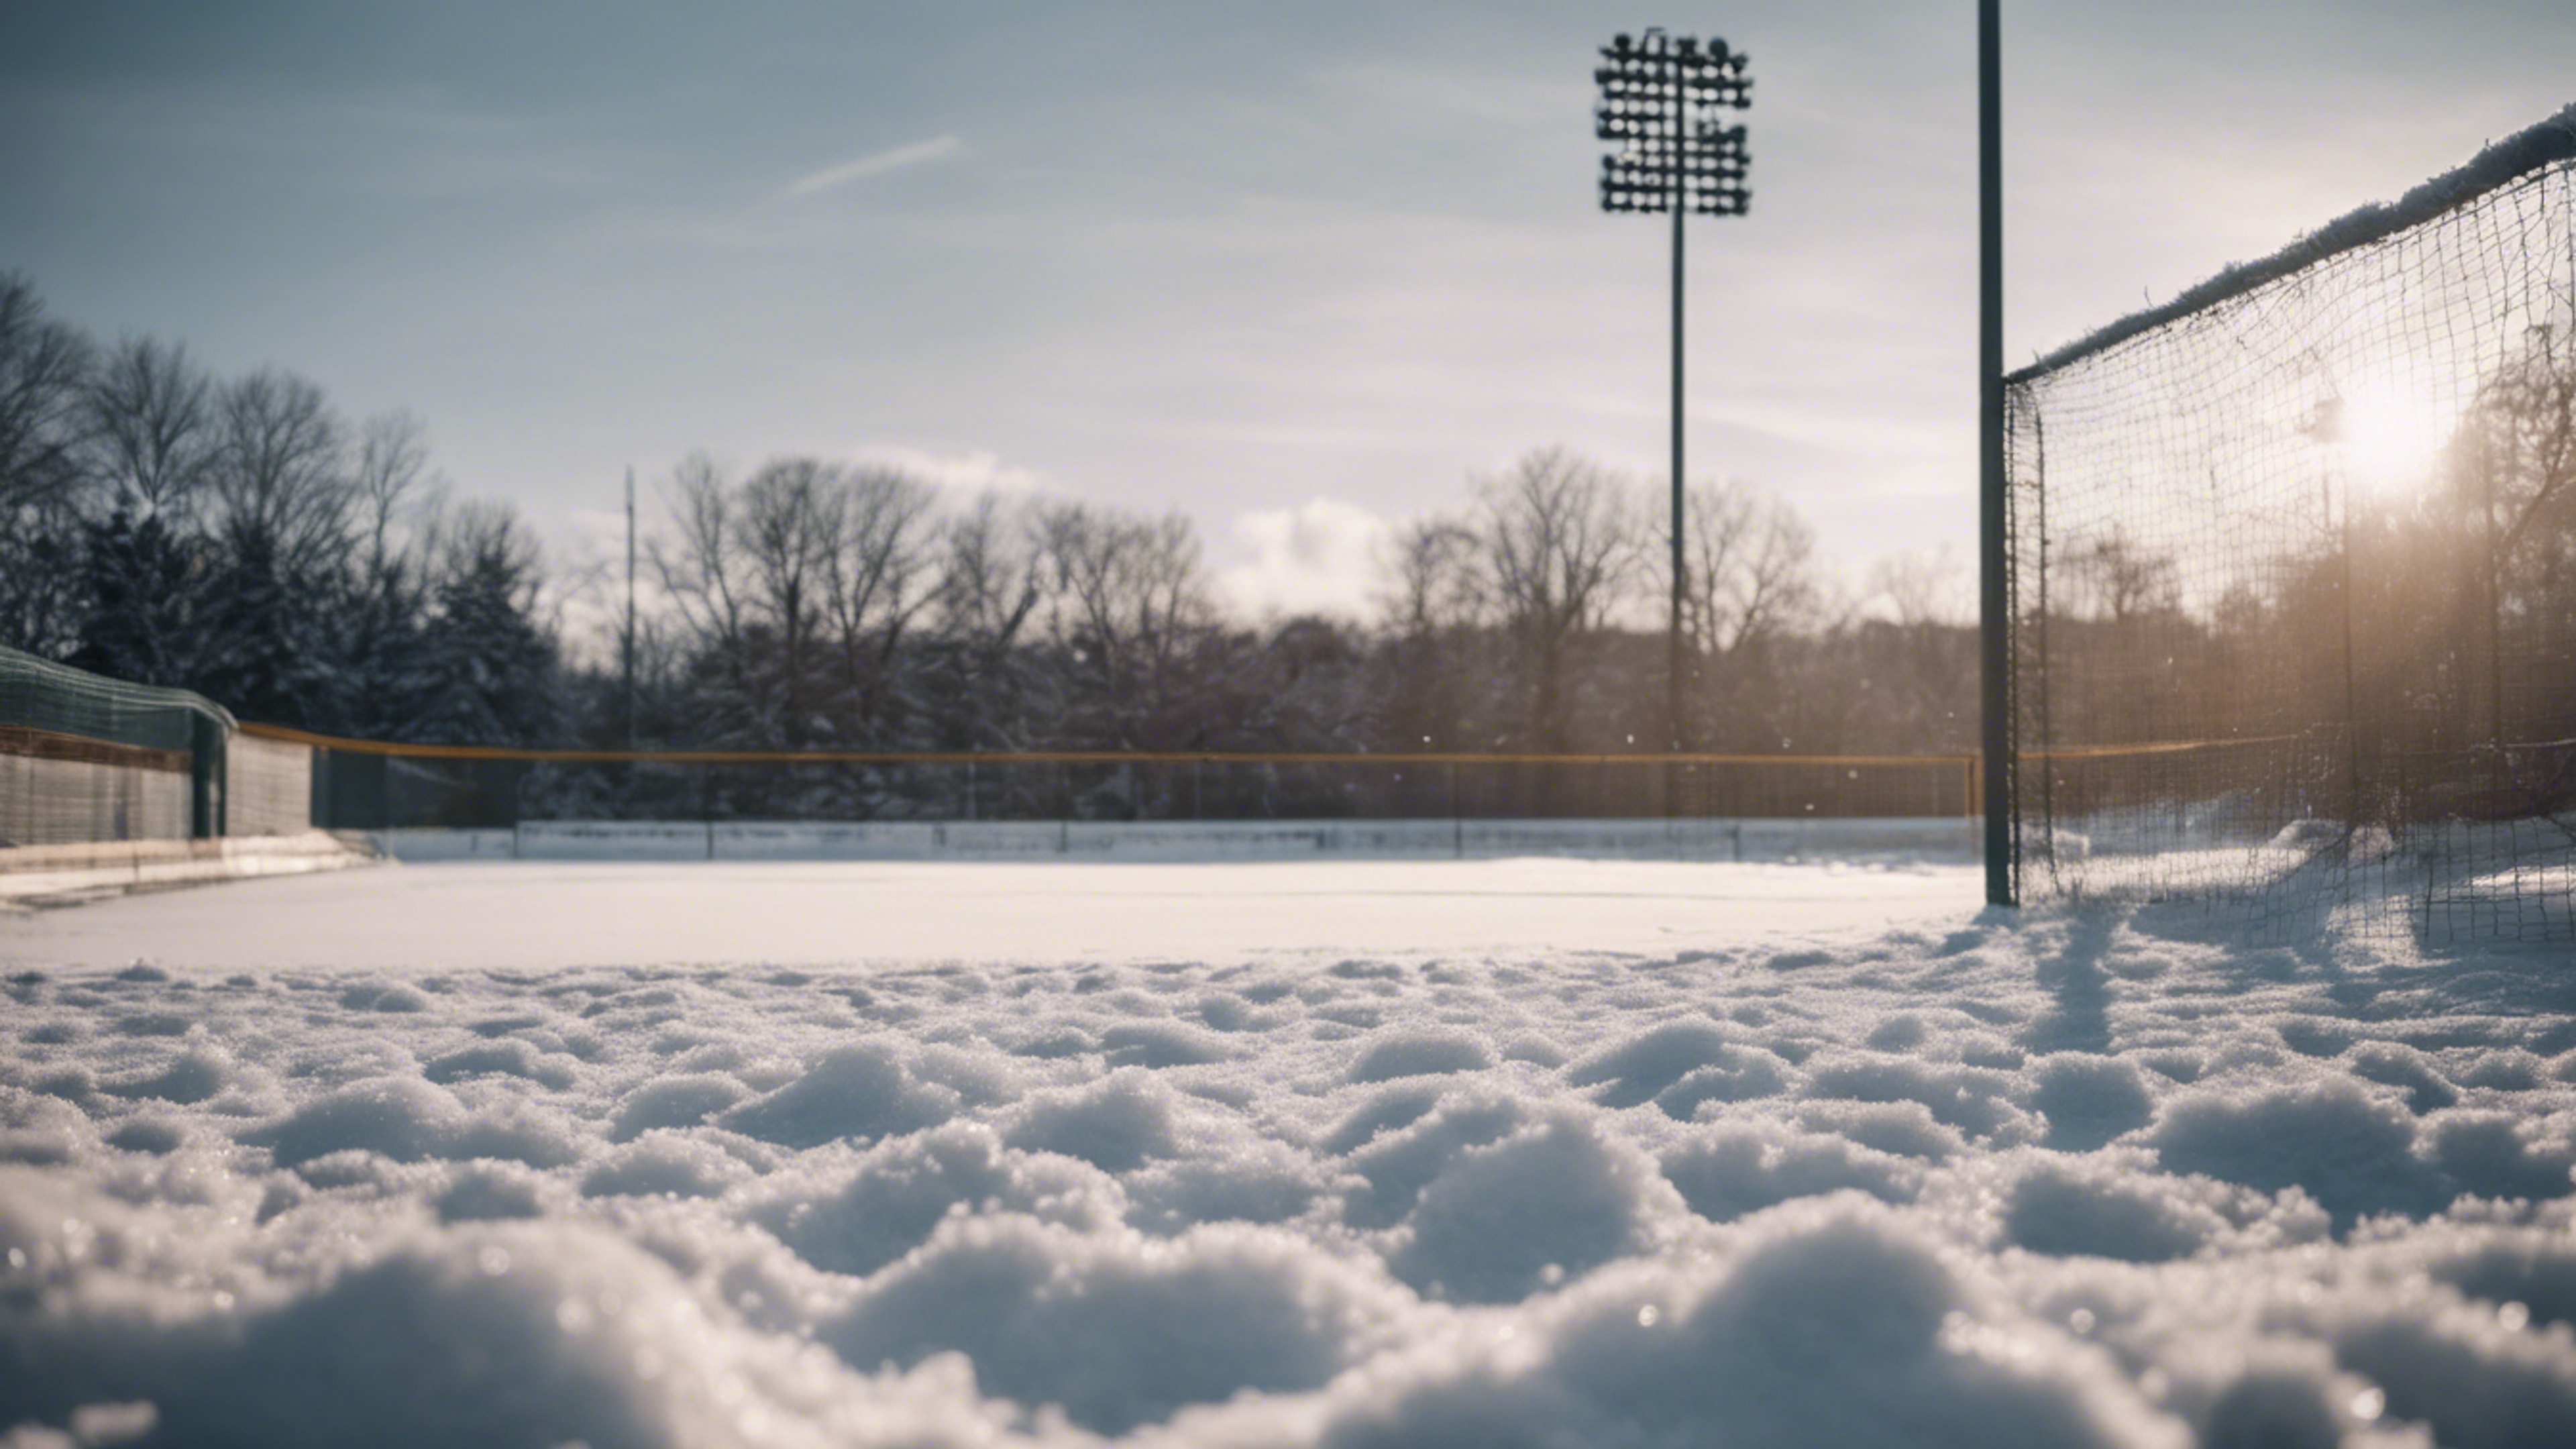 A baseball field covered in a thin layer of snow during off-season. Papel de parede[abf98c57f7b048239f2f]